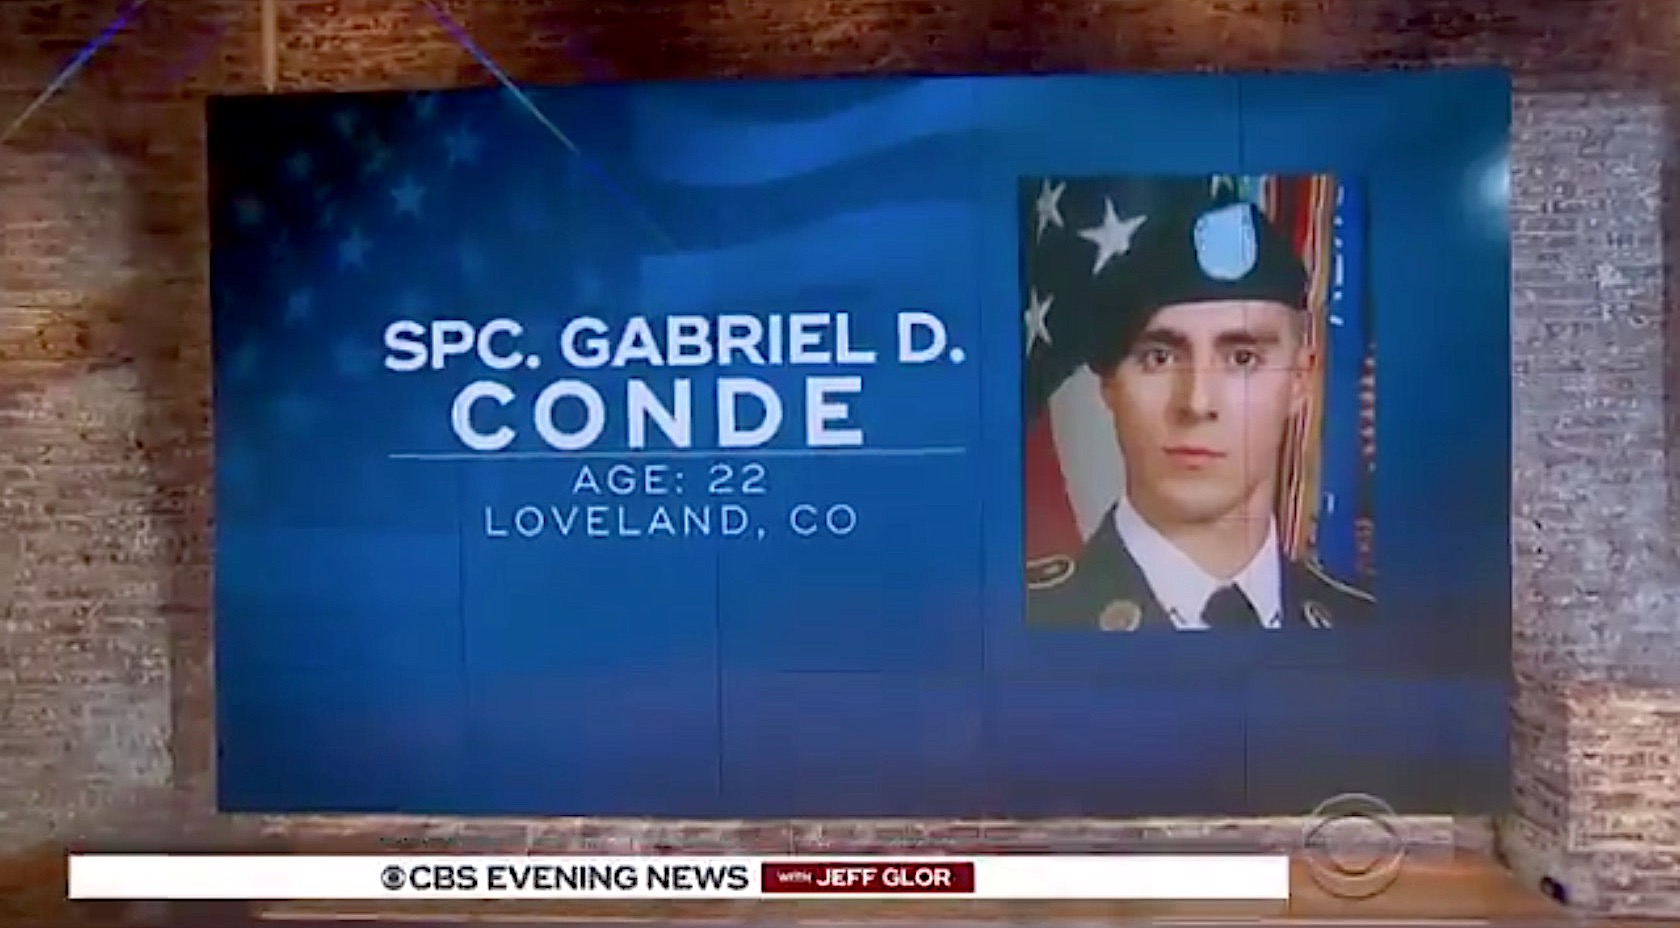 Spec. Gabriel Conde, killed in action in Afghanistan